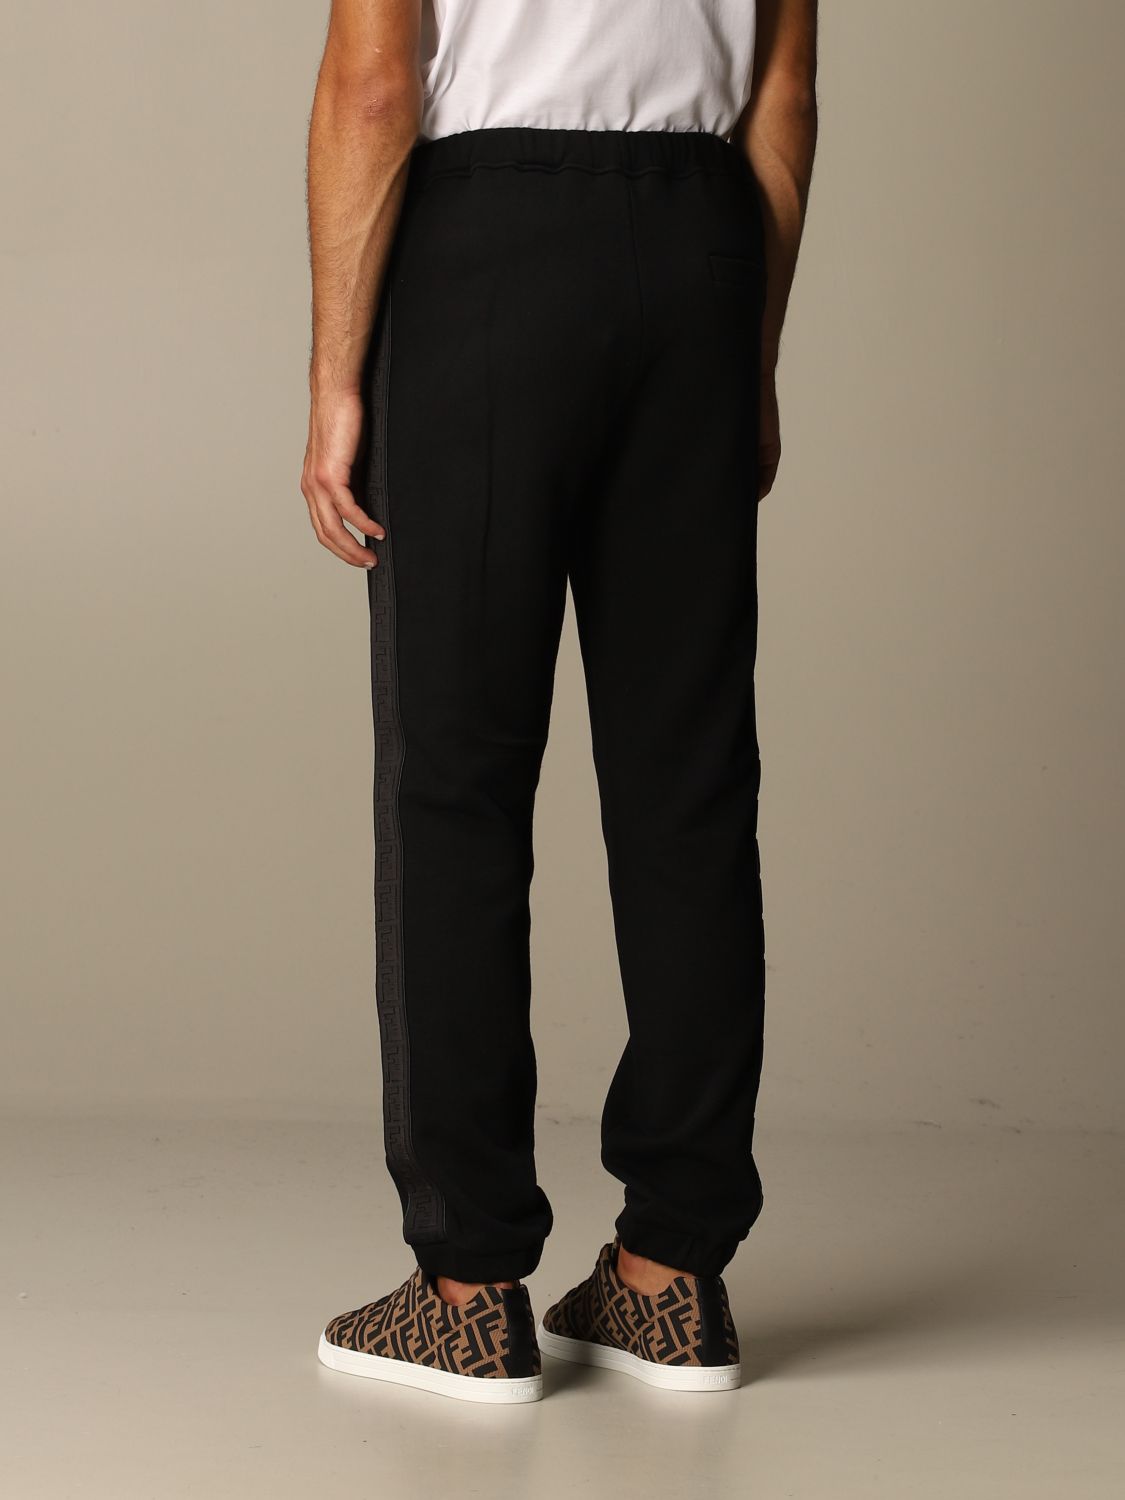 FENDI: Wool and cotton blend jogging trousers with logoed bands | Pants ...